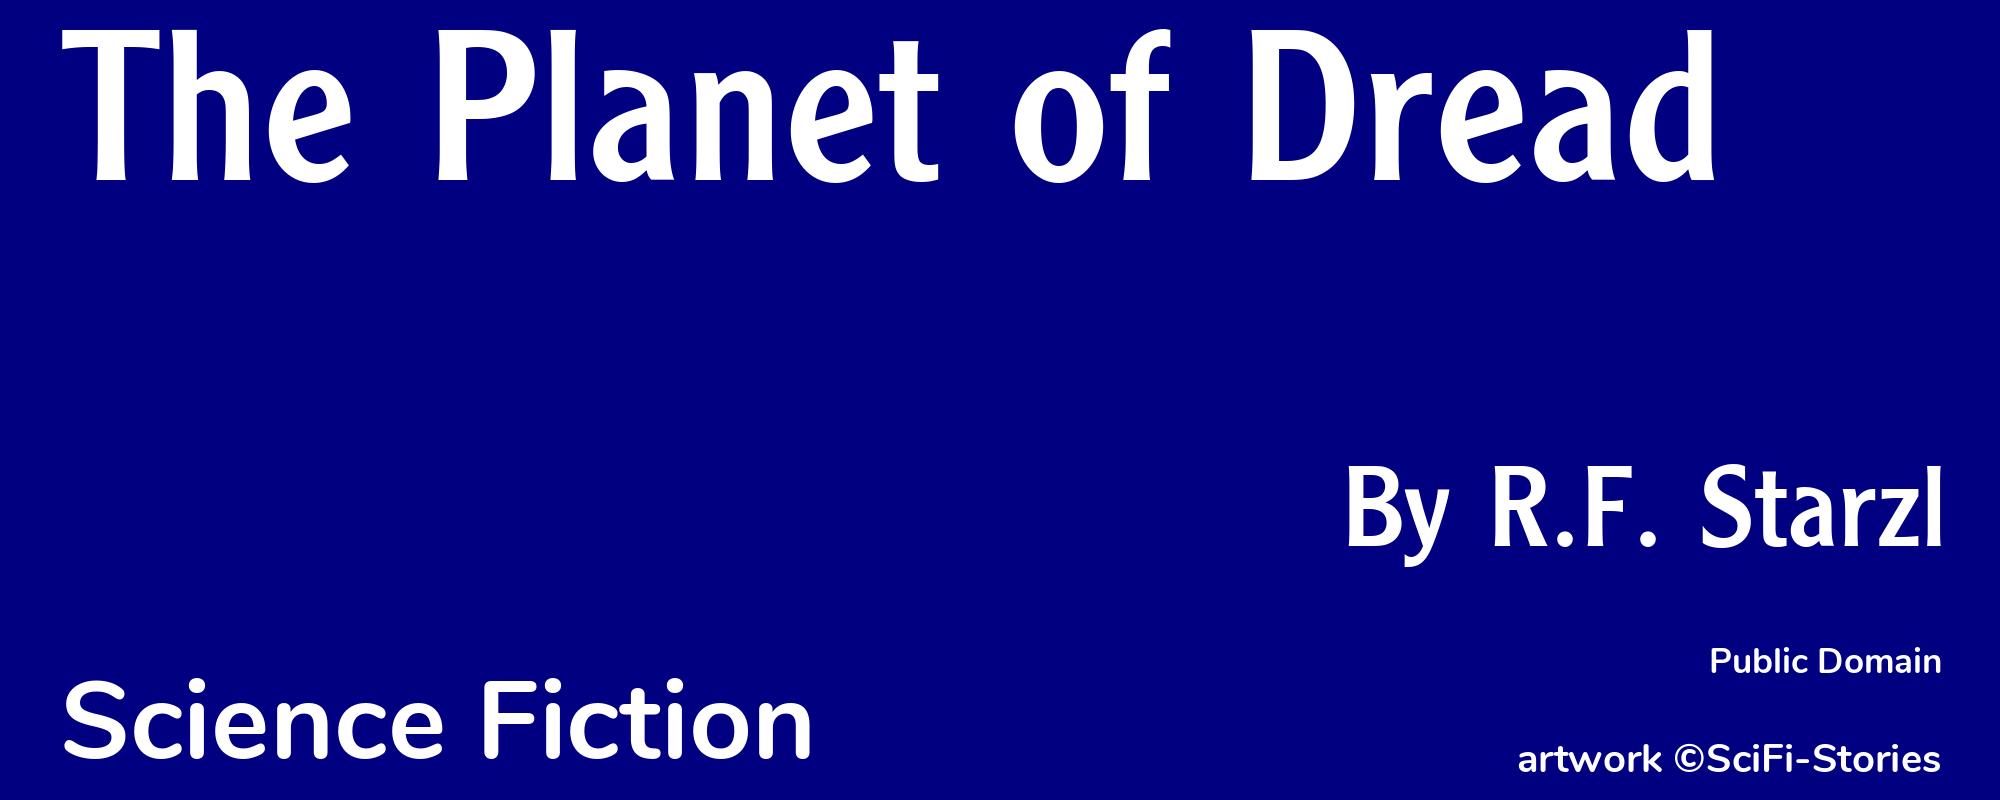 The Planet of Dread - Cover